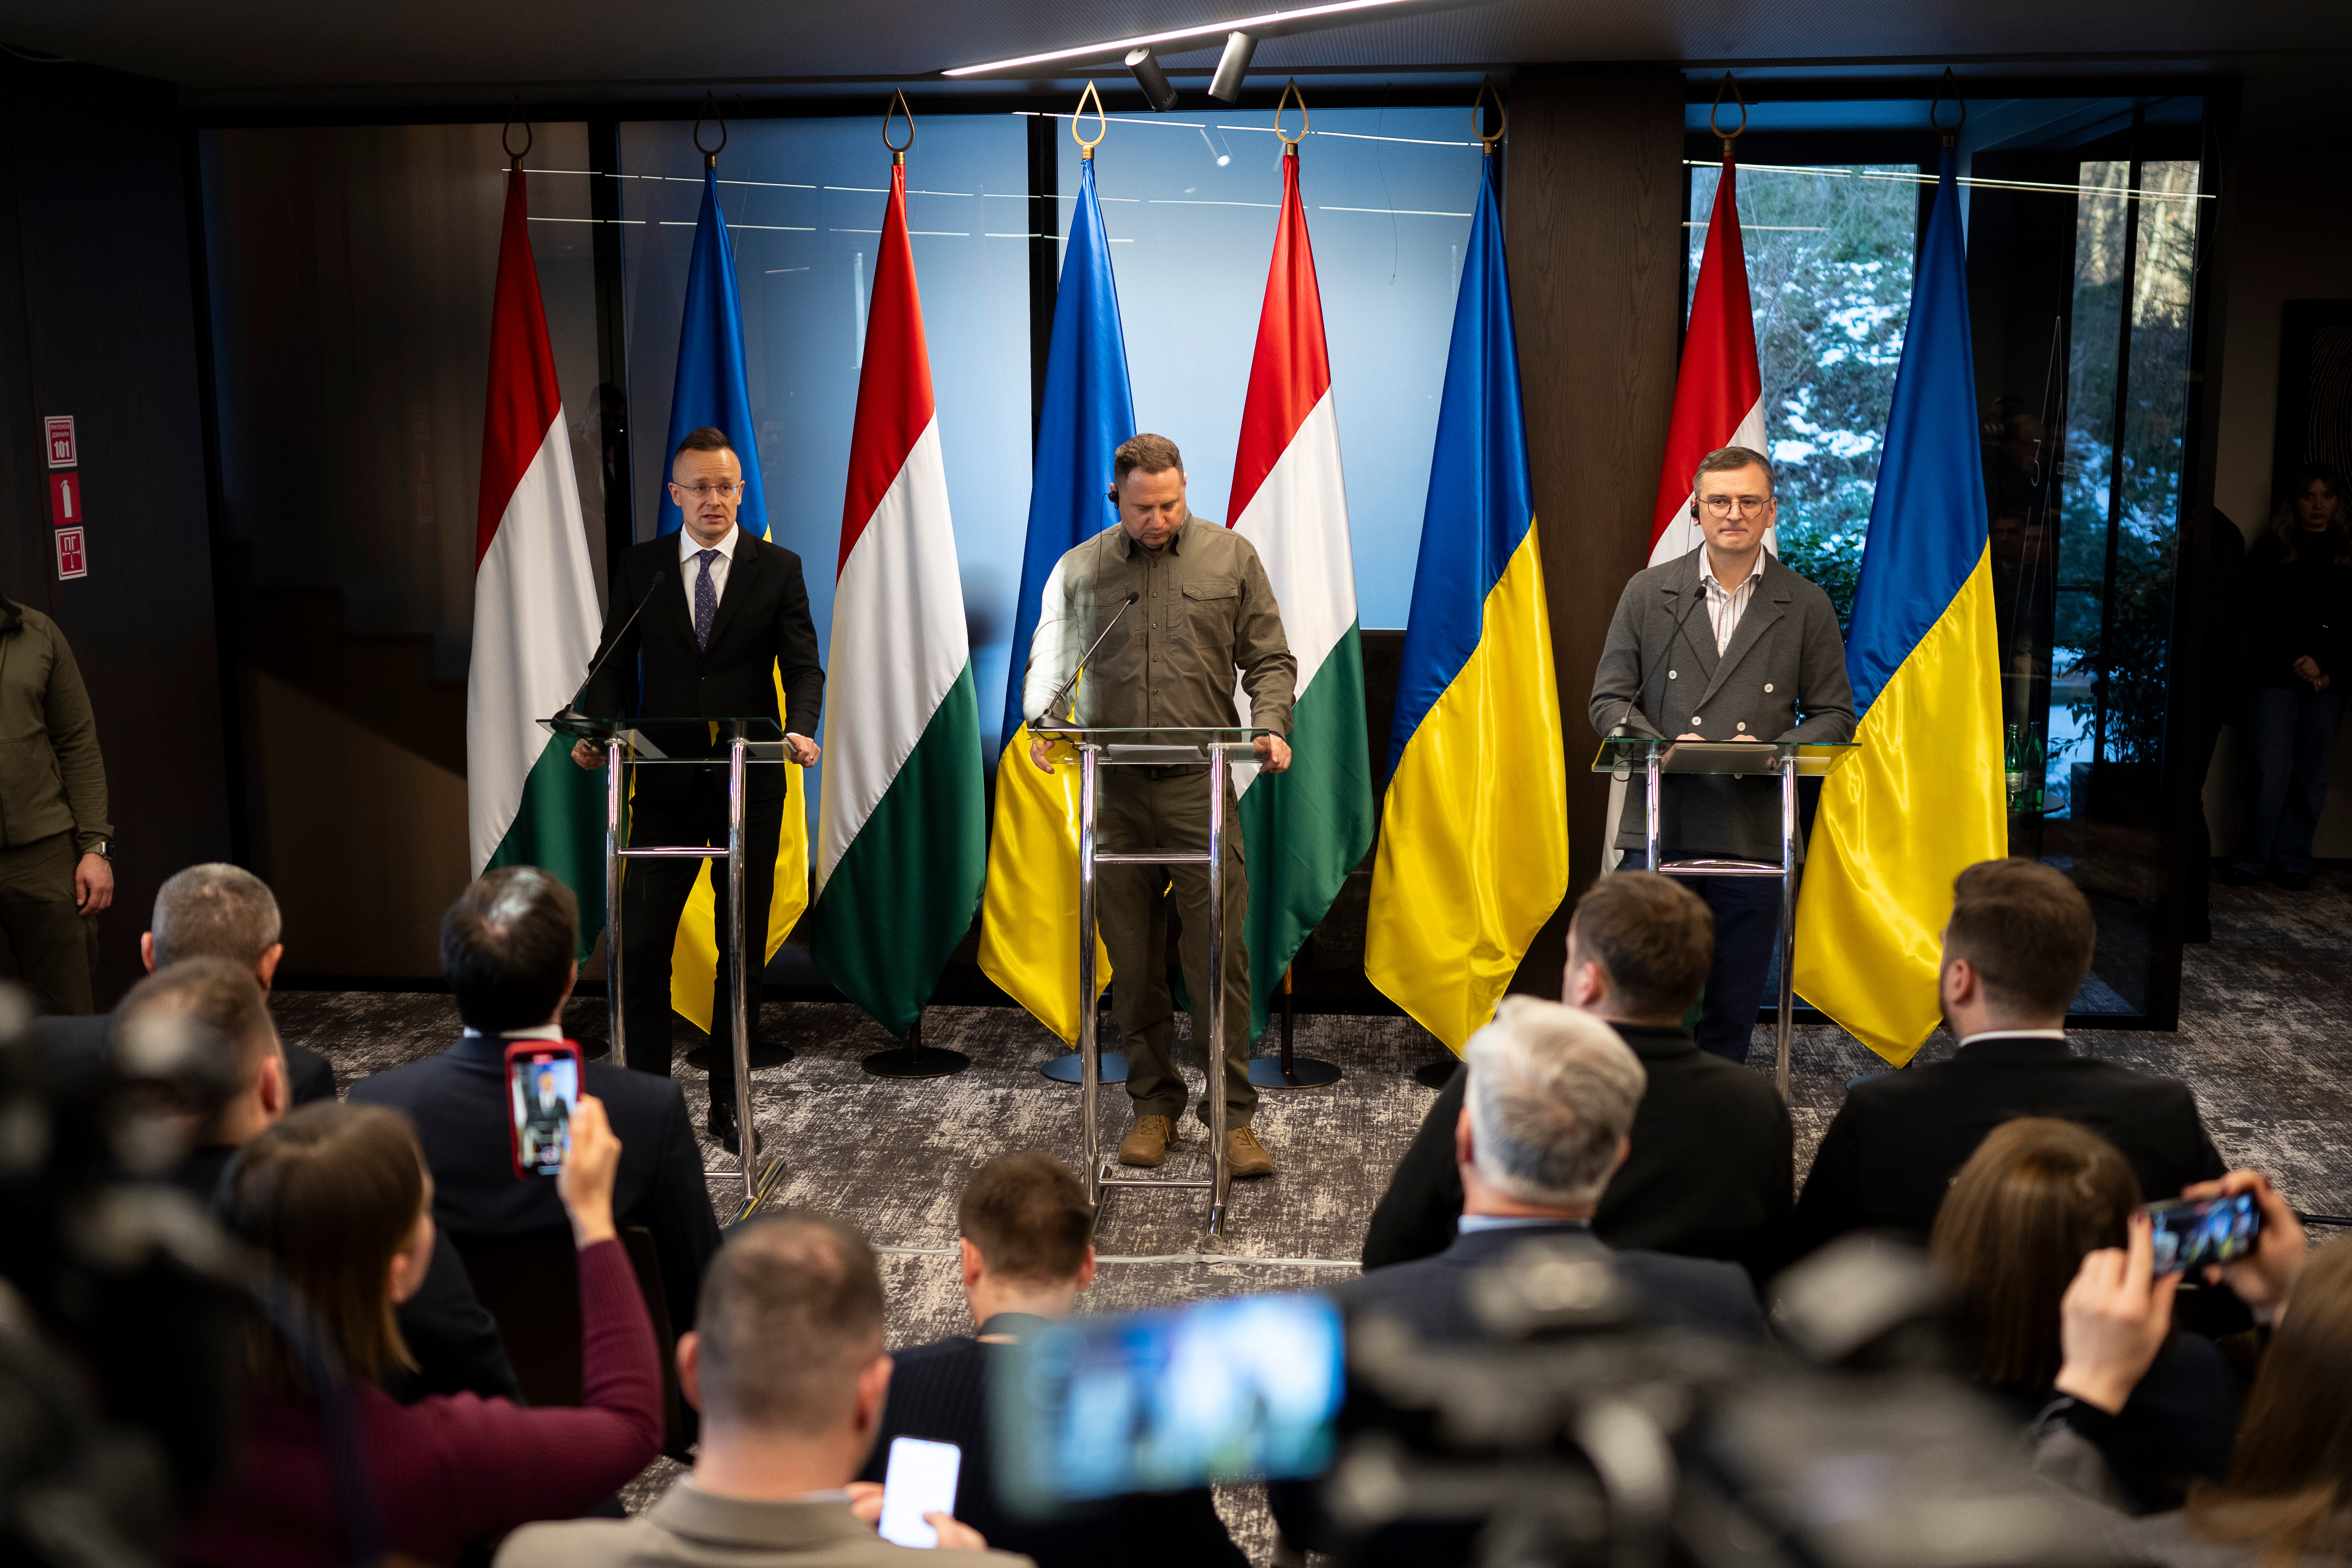 Hungary’s foreign minister Peter Szijjarto (left) speaks during a press conference with his Ukrainian counterpart Dmytro Kuleba (right)